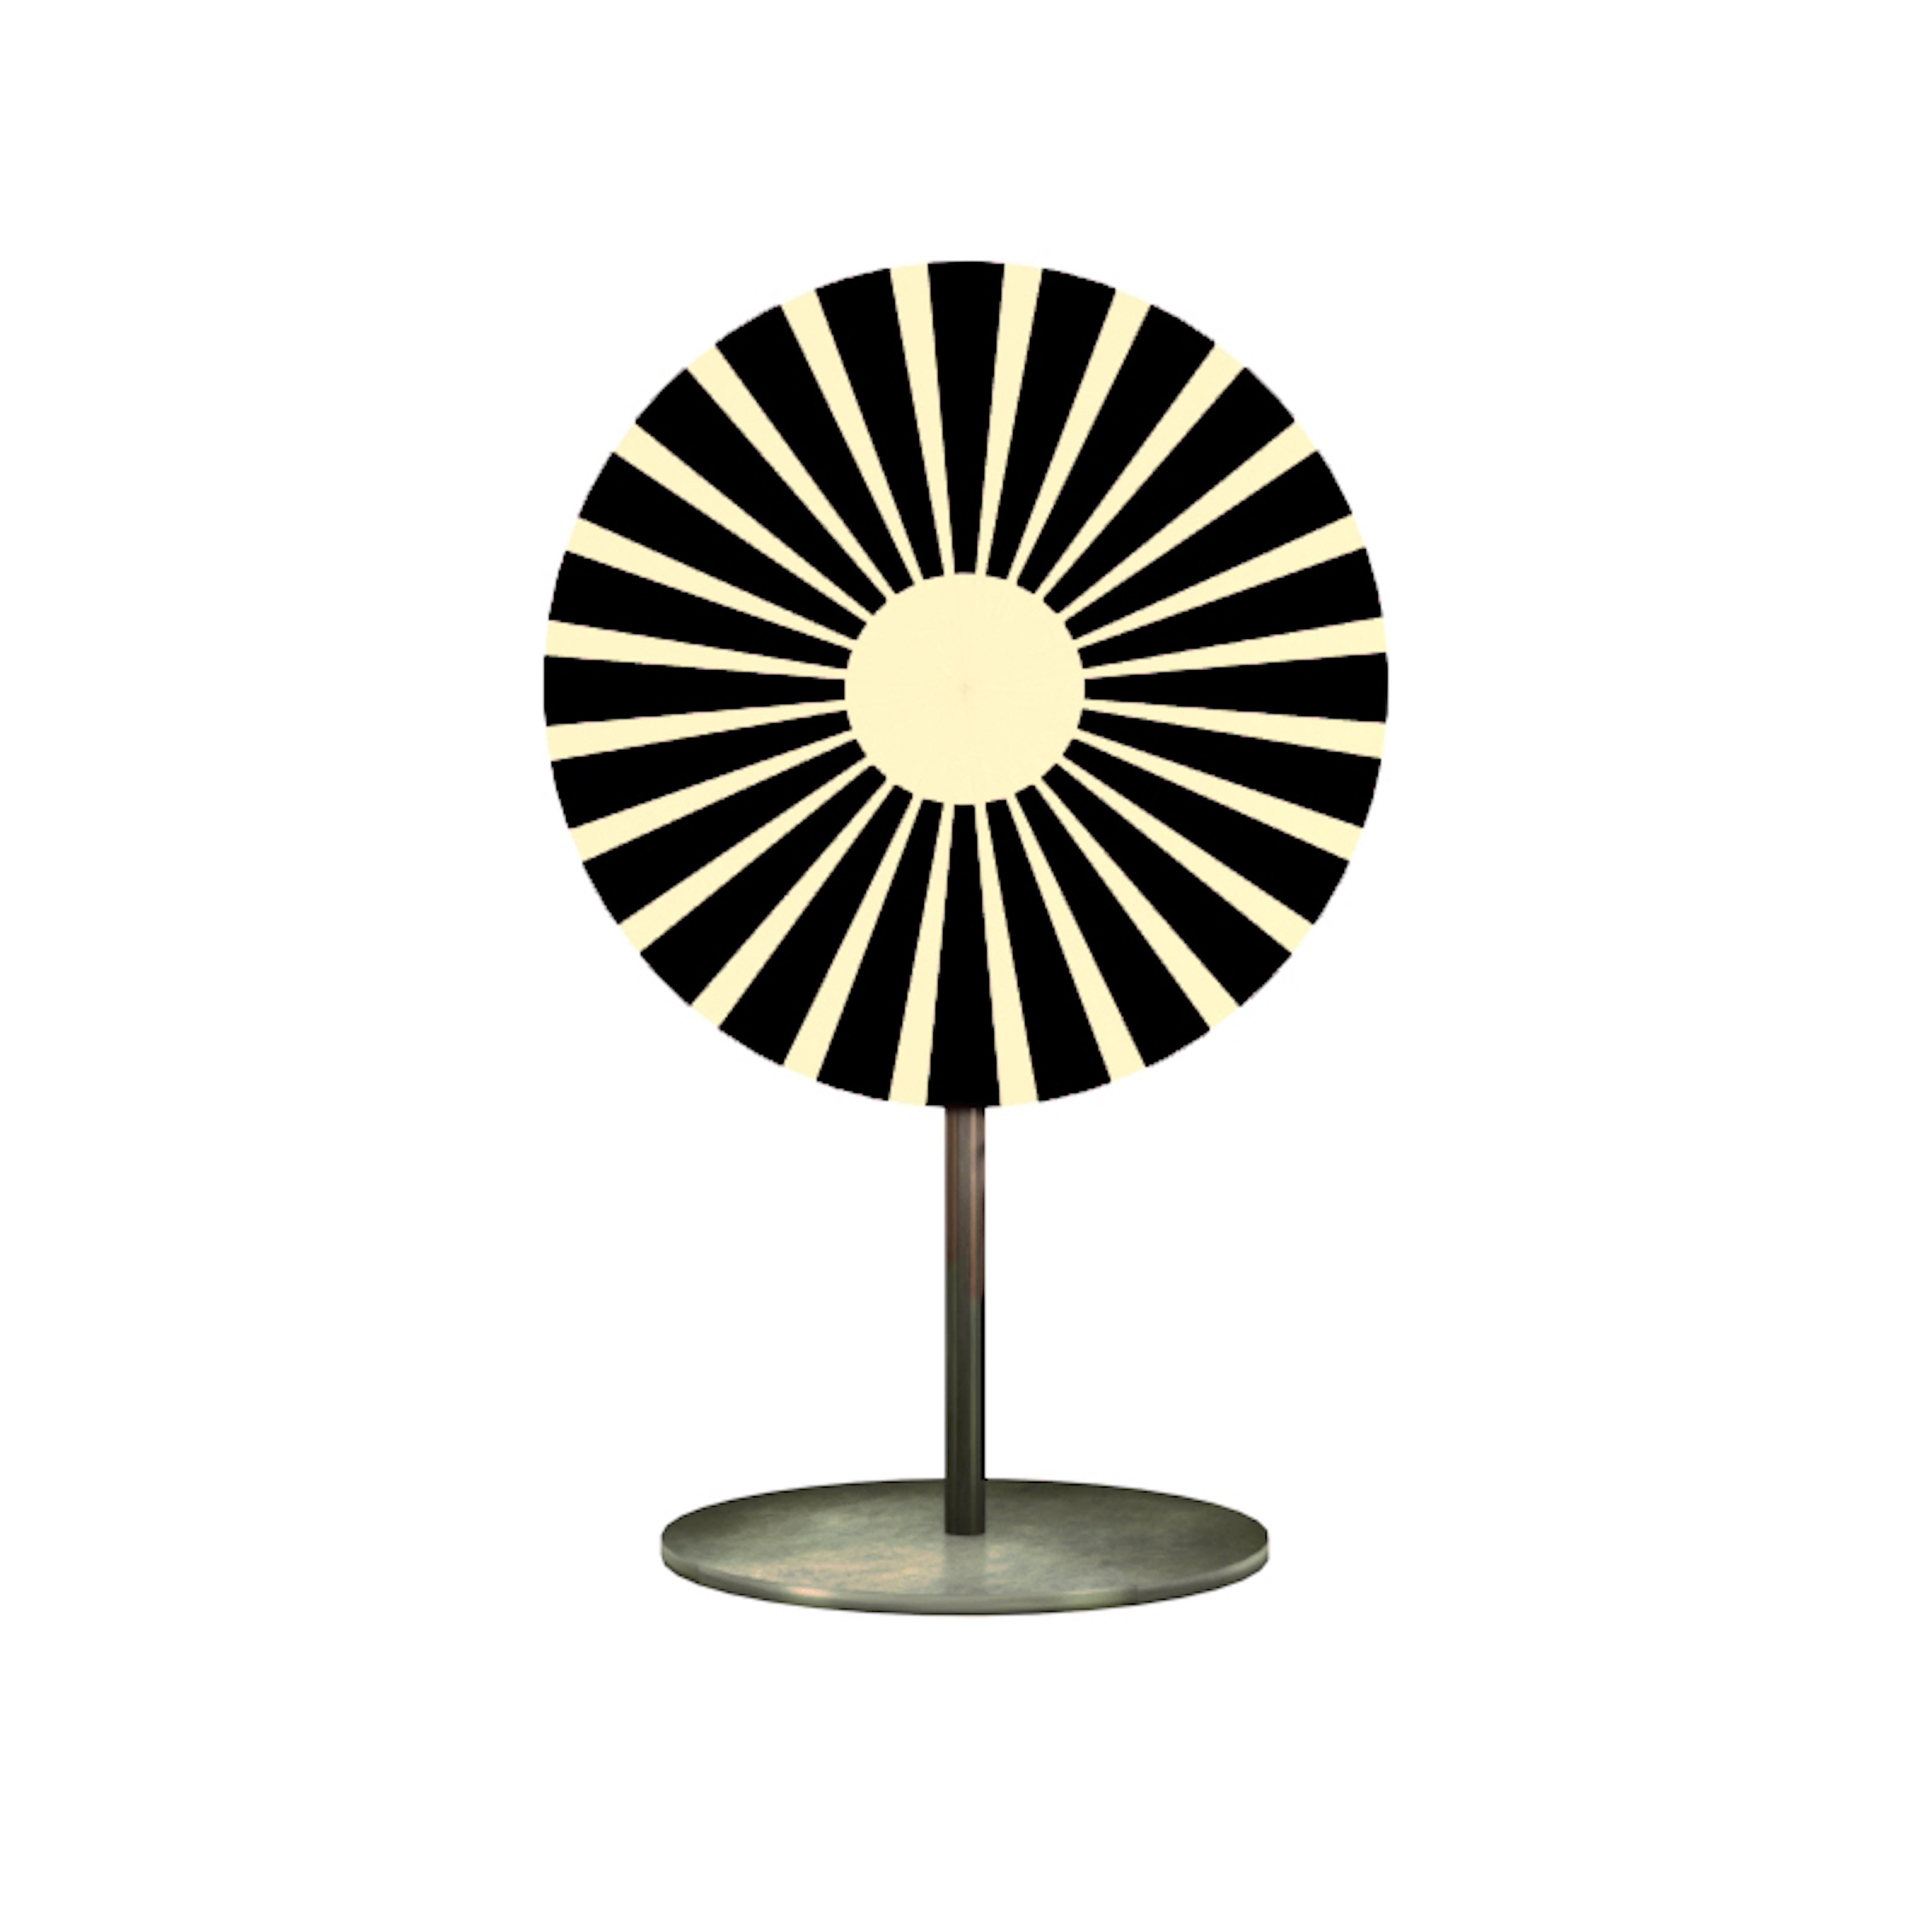 Paris Table Mirror Black and White by Matteo Cibic is a small table mirror. It is available in a range of colors, which can be customized according to the space.

India's handicrafts are as multifarious as its cultures, and as rich as its history.